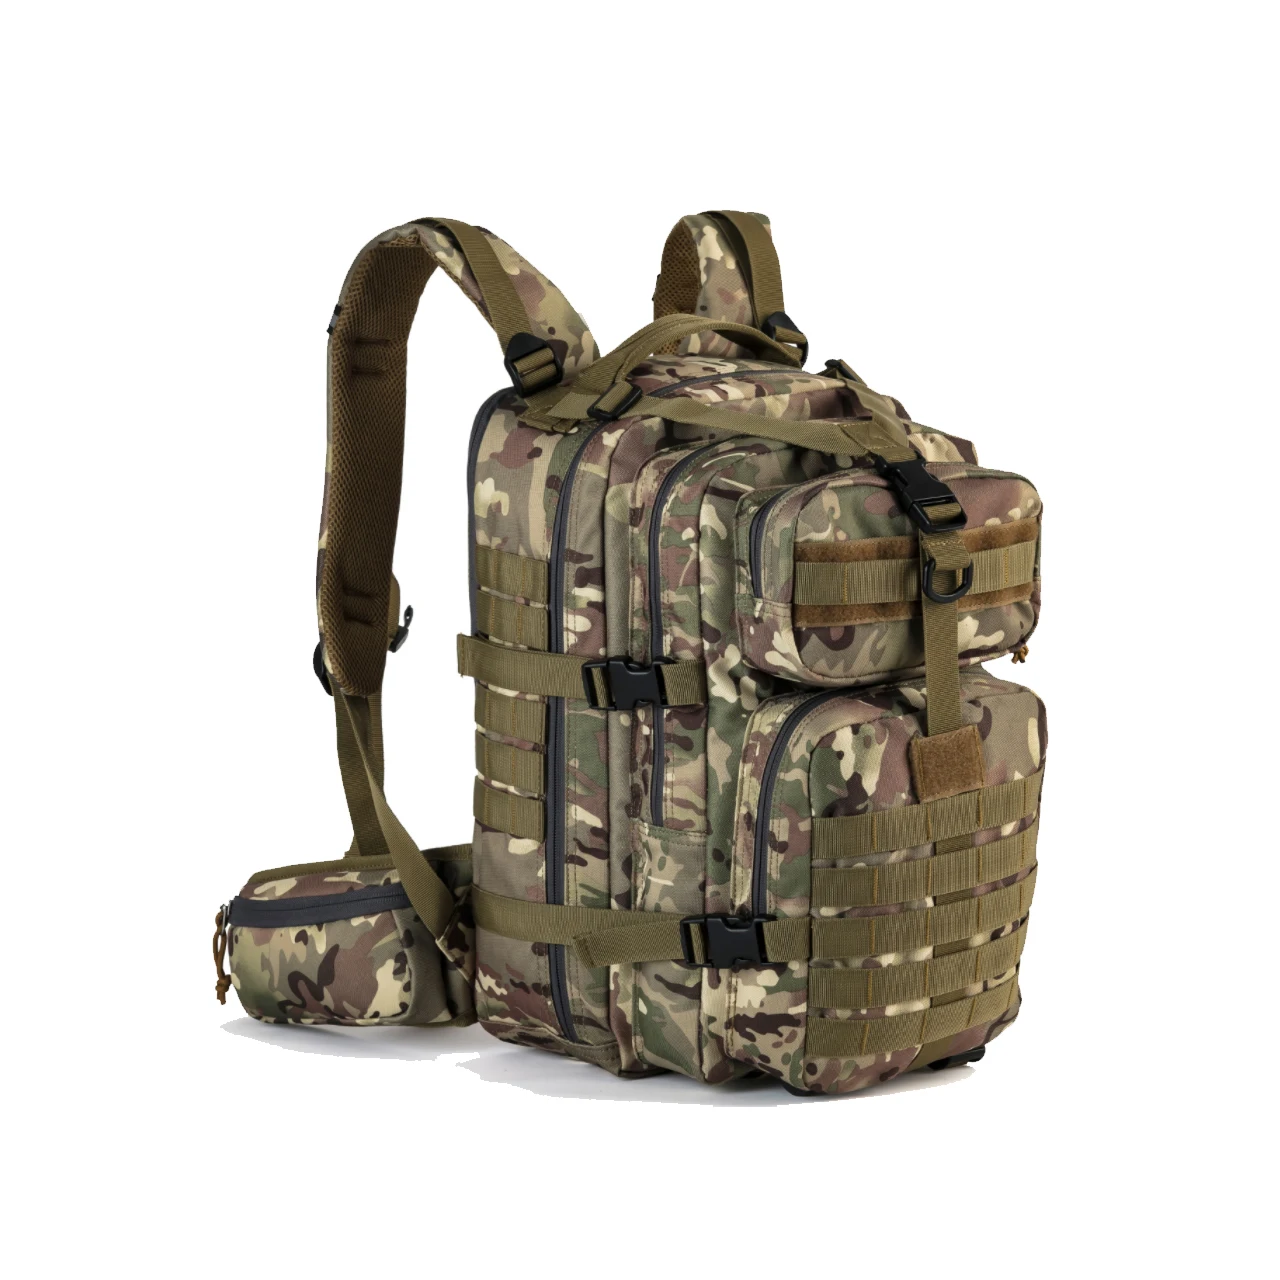 Hunting Backpack Military Army Camping Hiking Camo Bag Tactical Outdoor Gear 35L 